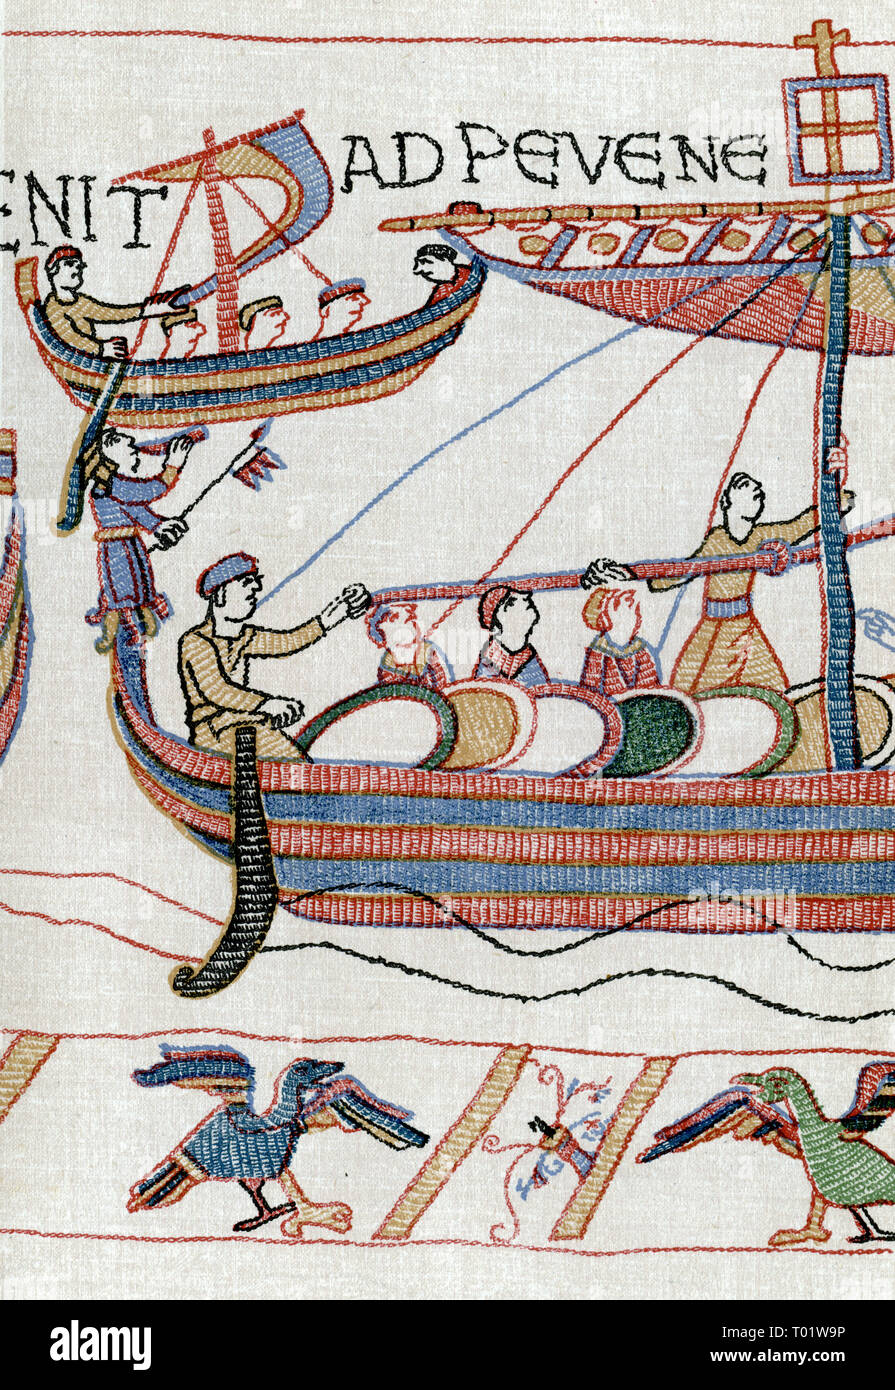 William the Conqueror’s flagship, 'Mora', on its way to England, 11th century. A detail of the Bayeux Tapestry. The Bayeux Tapestry (Tapisserie de Bayeux) depicts the events leading up to the Norman conquest of England concerning William, Duke of Normandy, and Harold, Earl of Wessex, later King of England, and culminating in the Battle of Hastings. Stock Photo